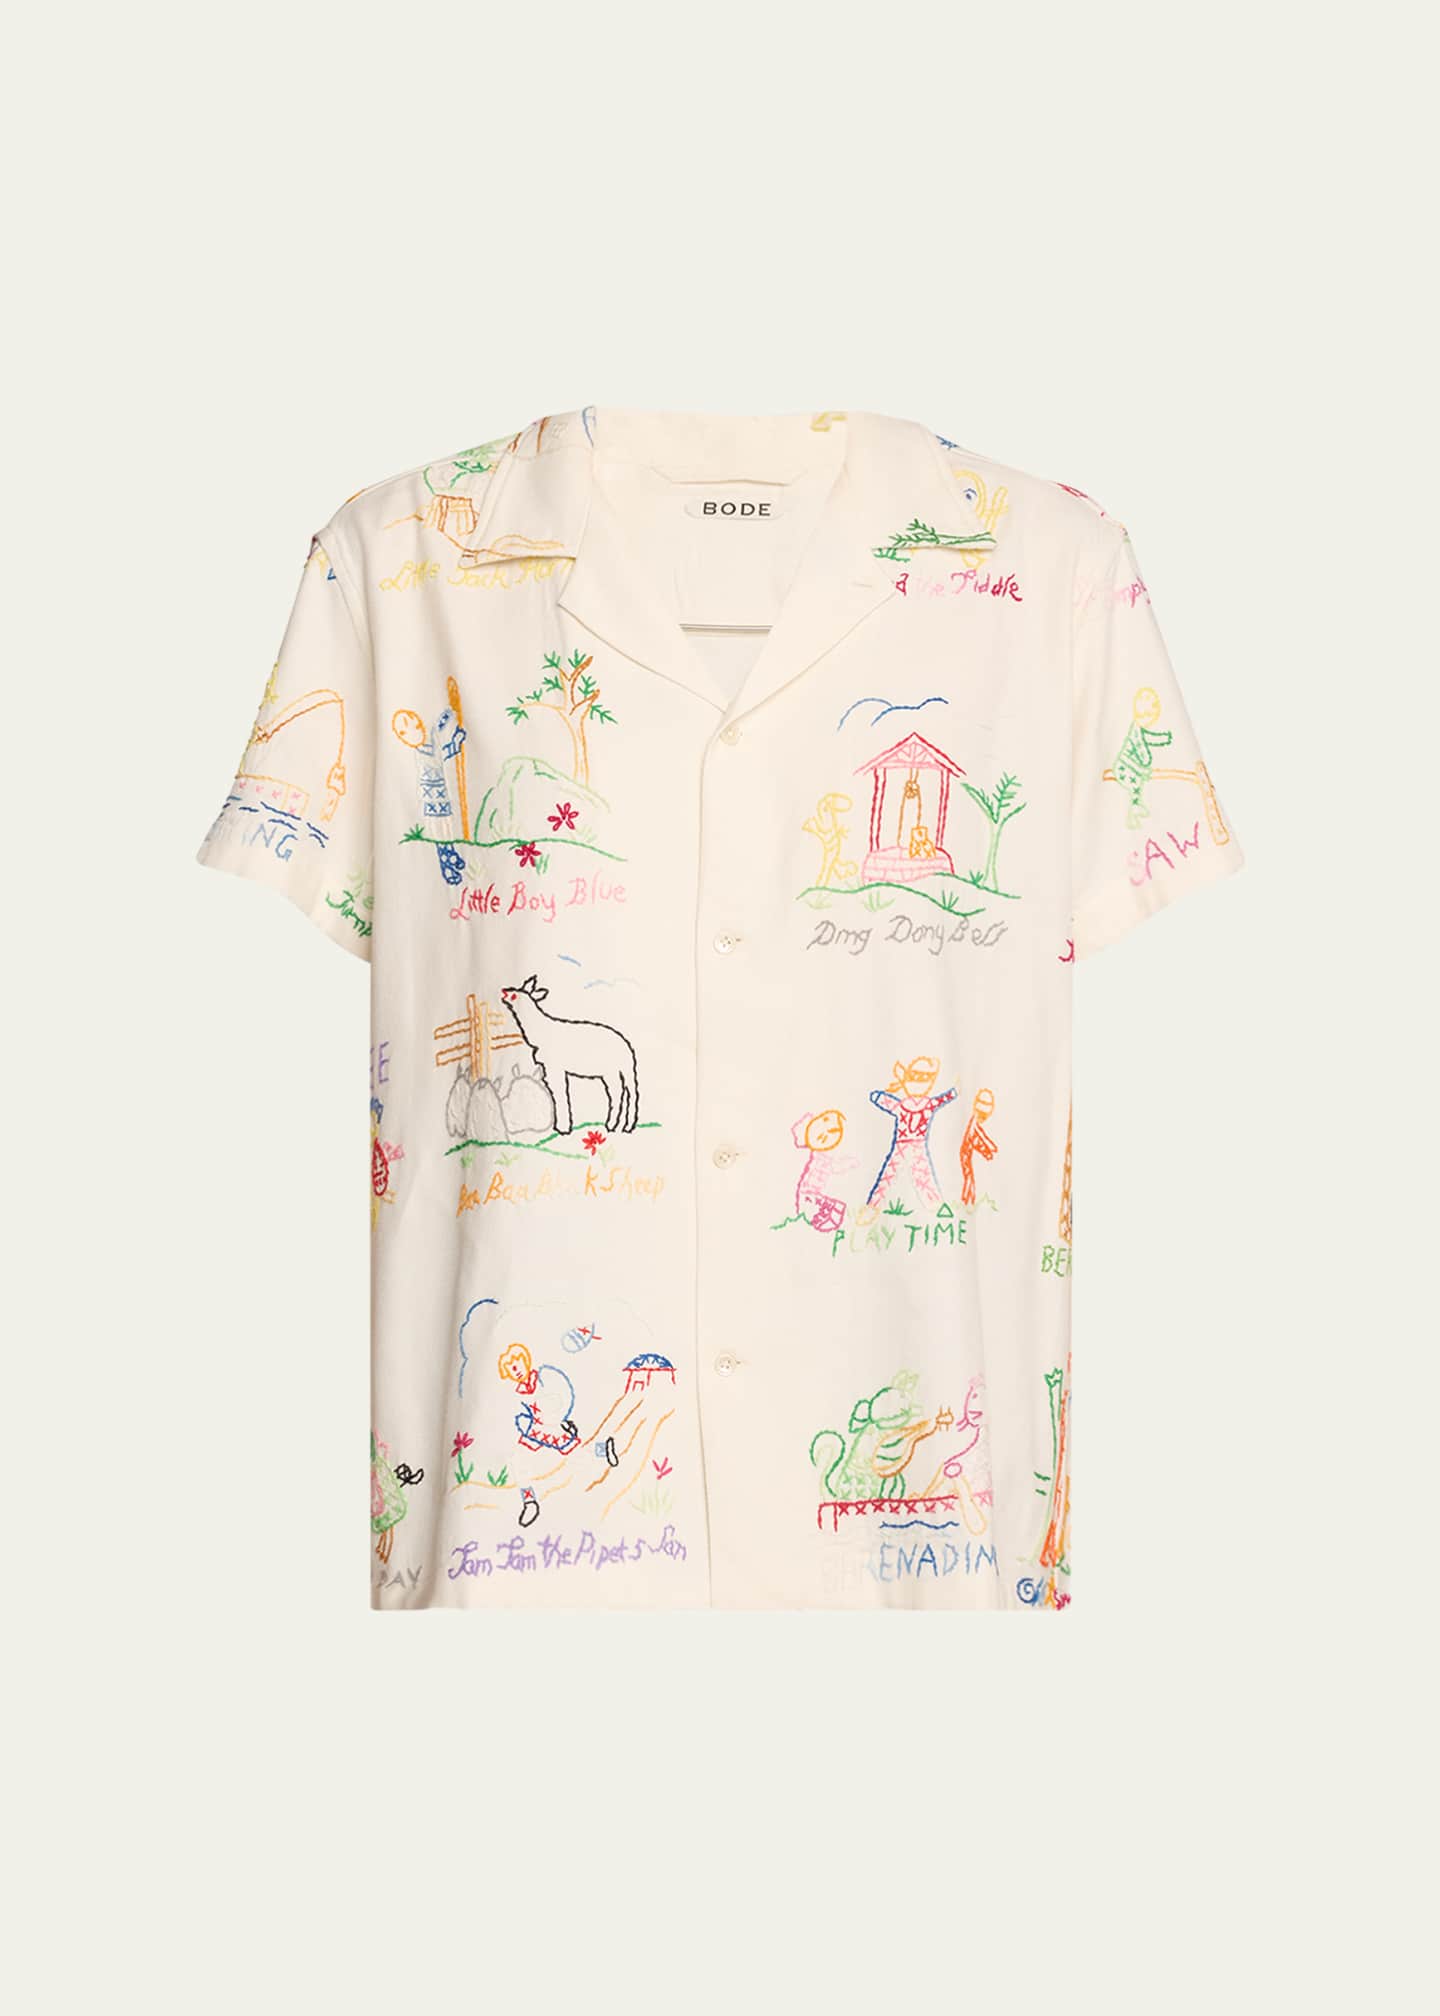 Bode Embroidered Tee – BODE